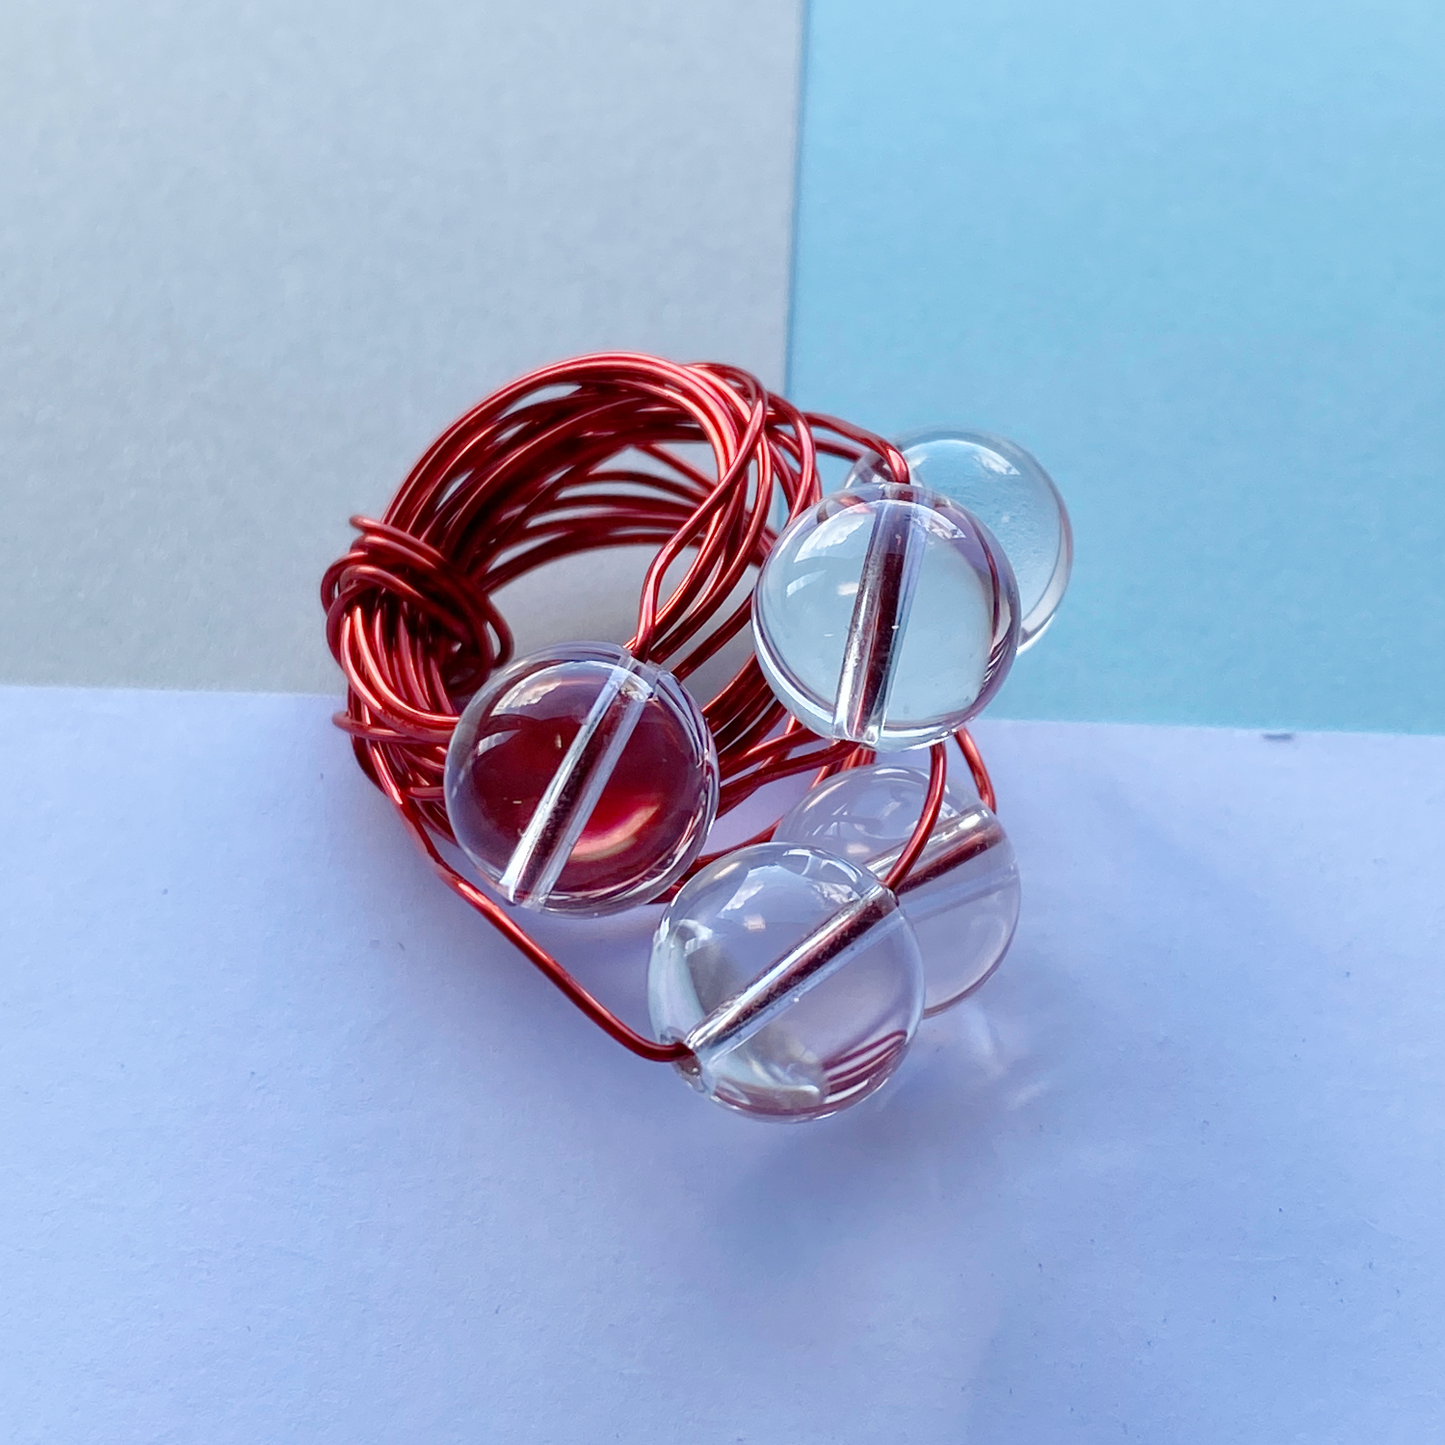 Wire Wrap Rings - reds/purple/pink - Medium - The Argentum Design Co